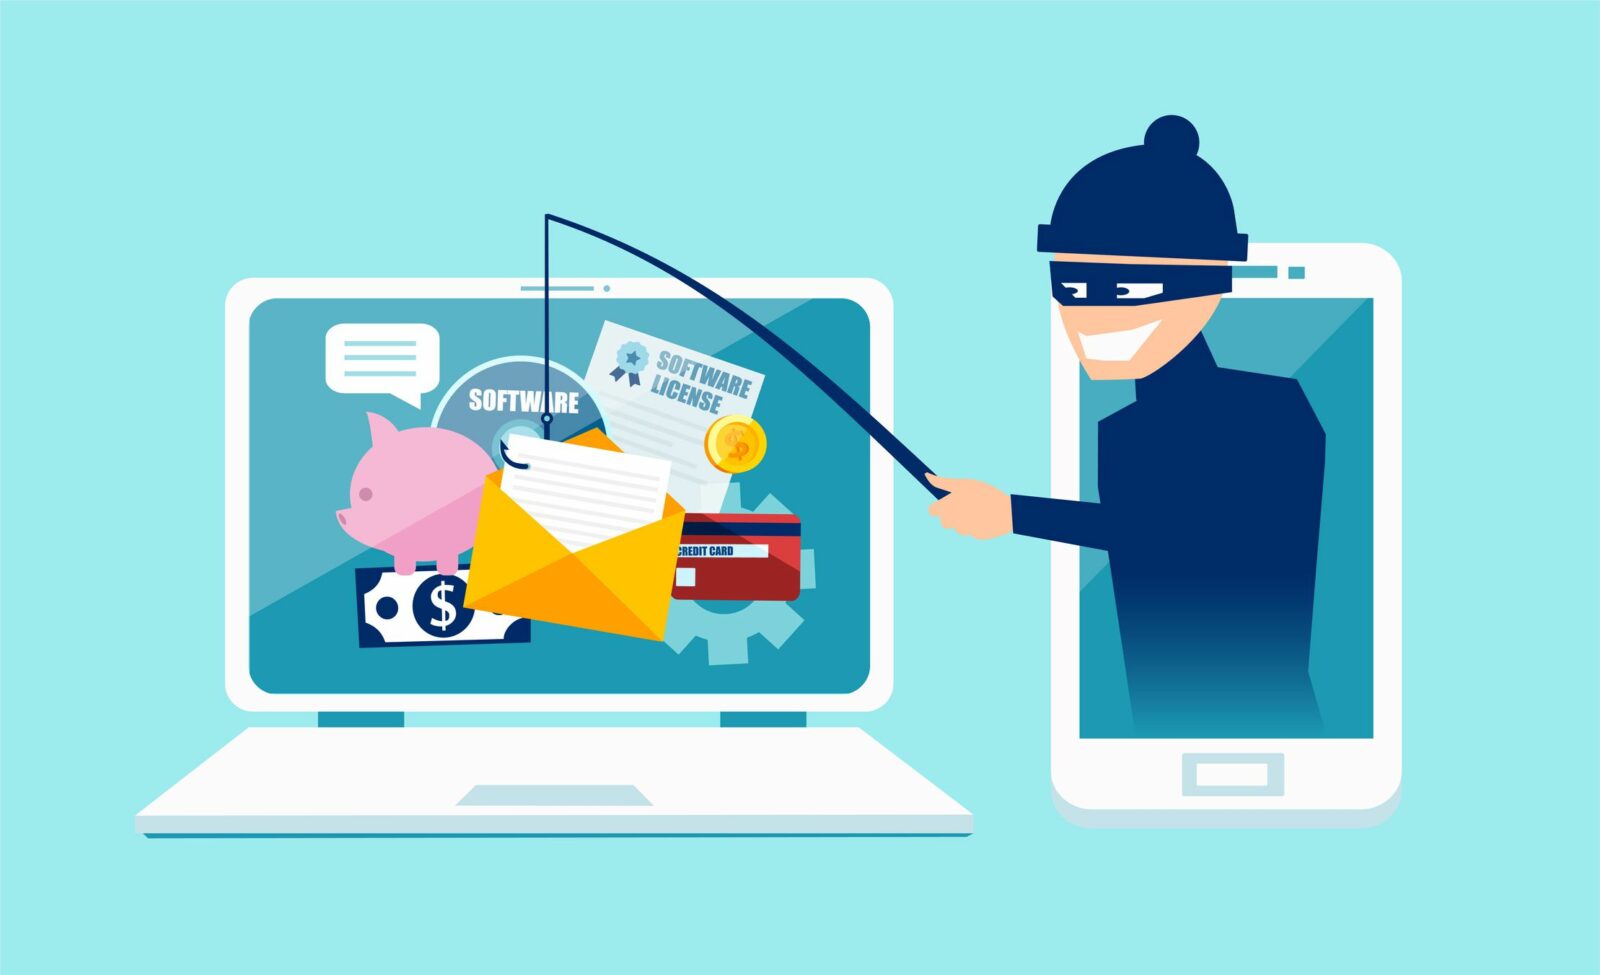 Your online security - Why should you care? Image showing scammer stealing data